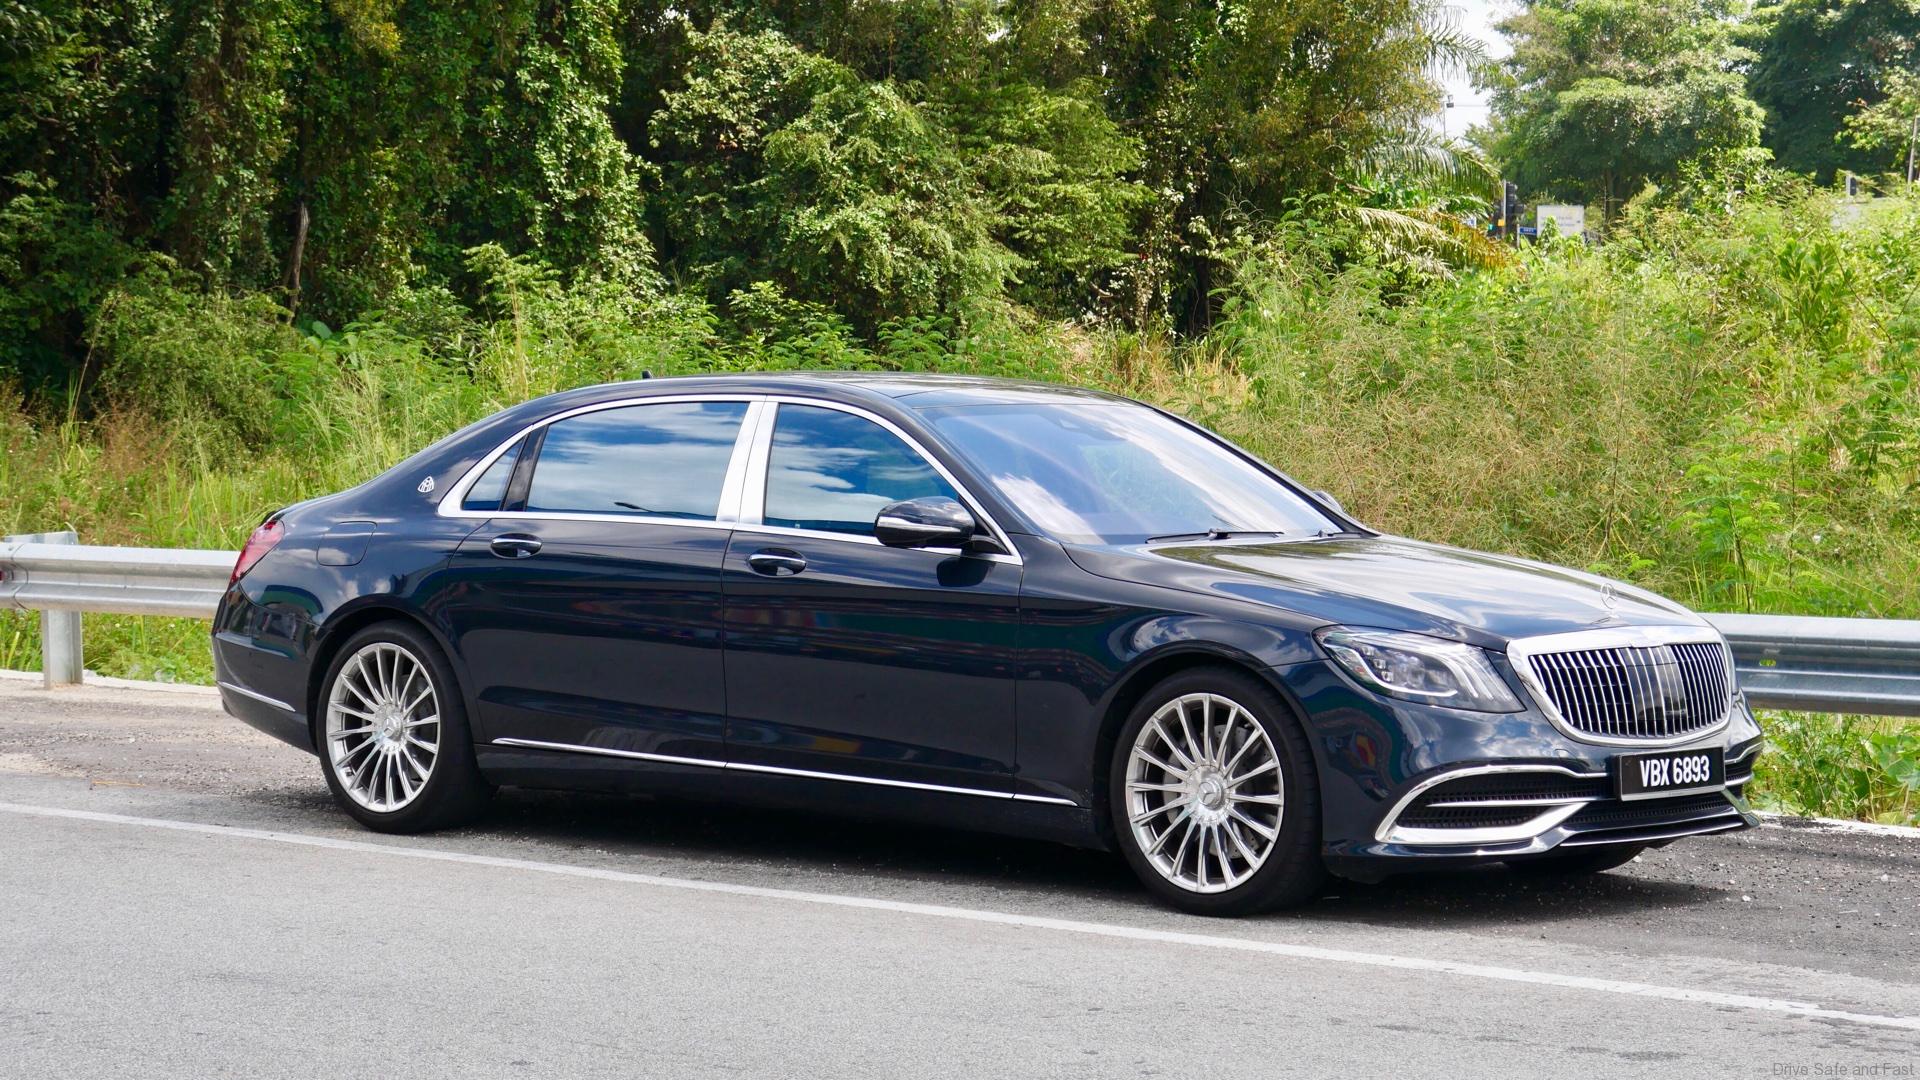 Mercedes-Benz S560 2018 review: snapshot | CarsGuide